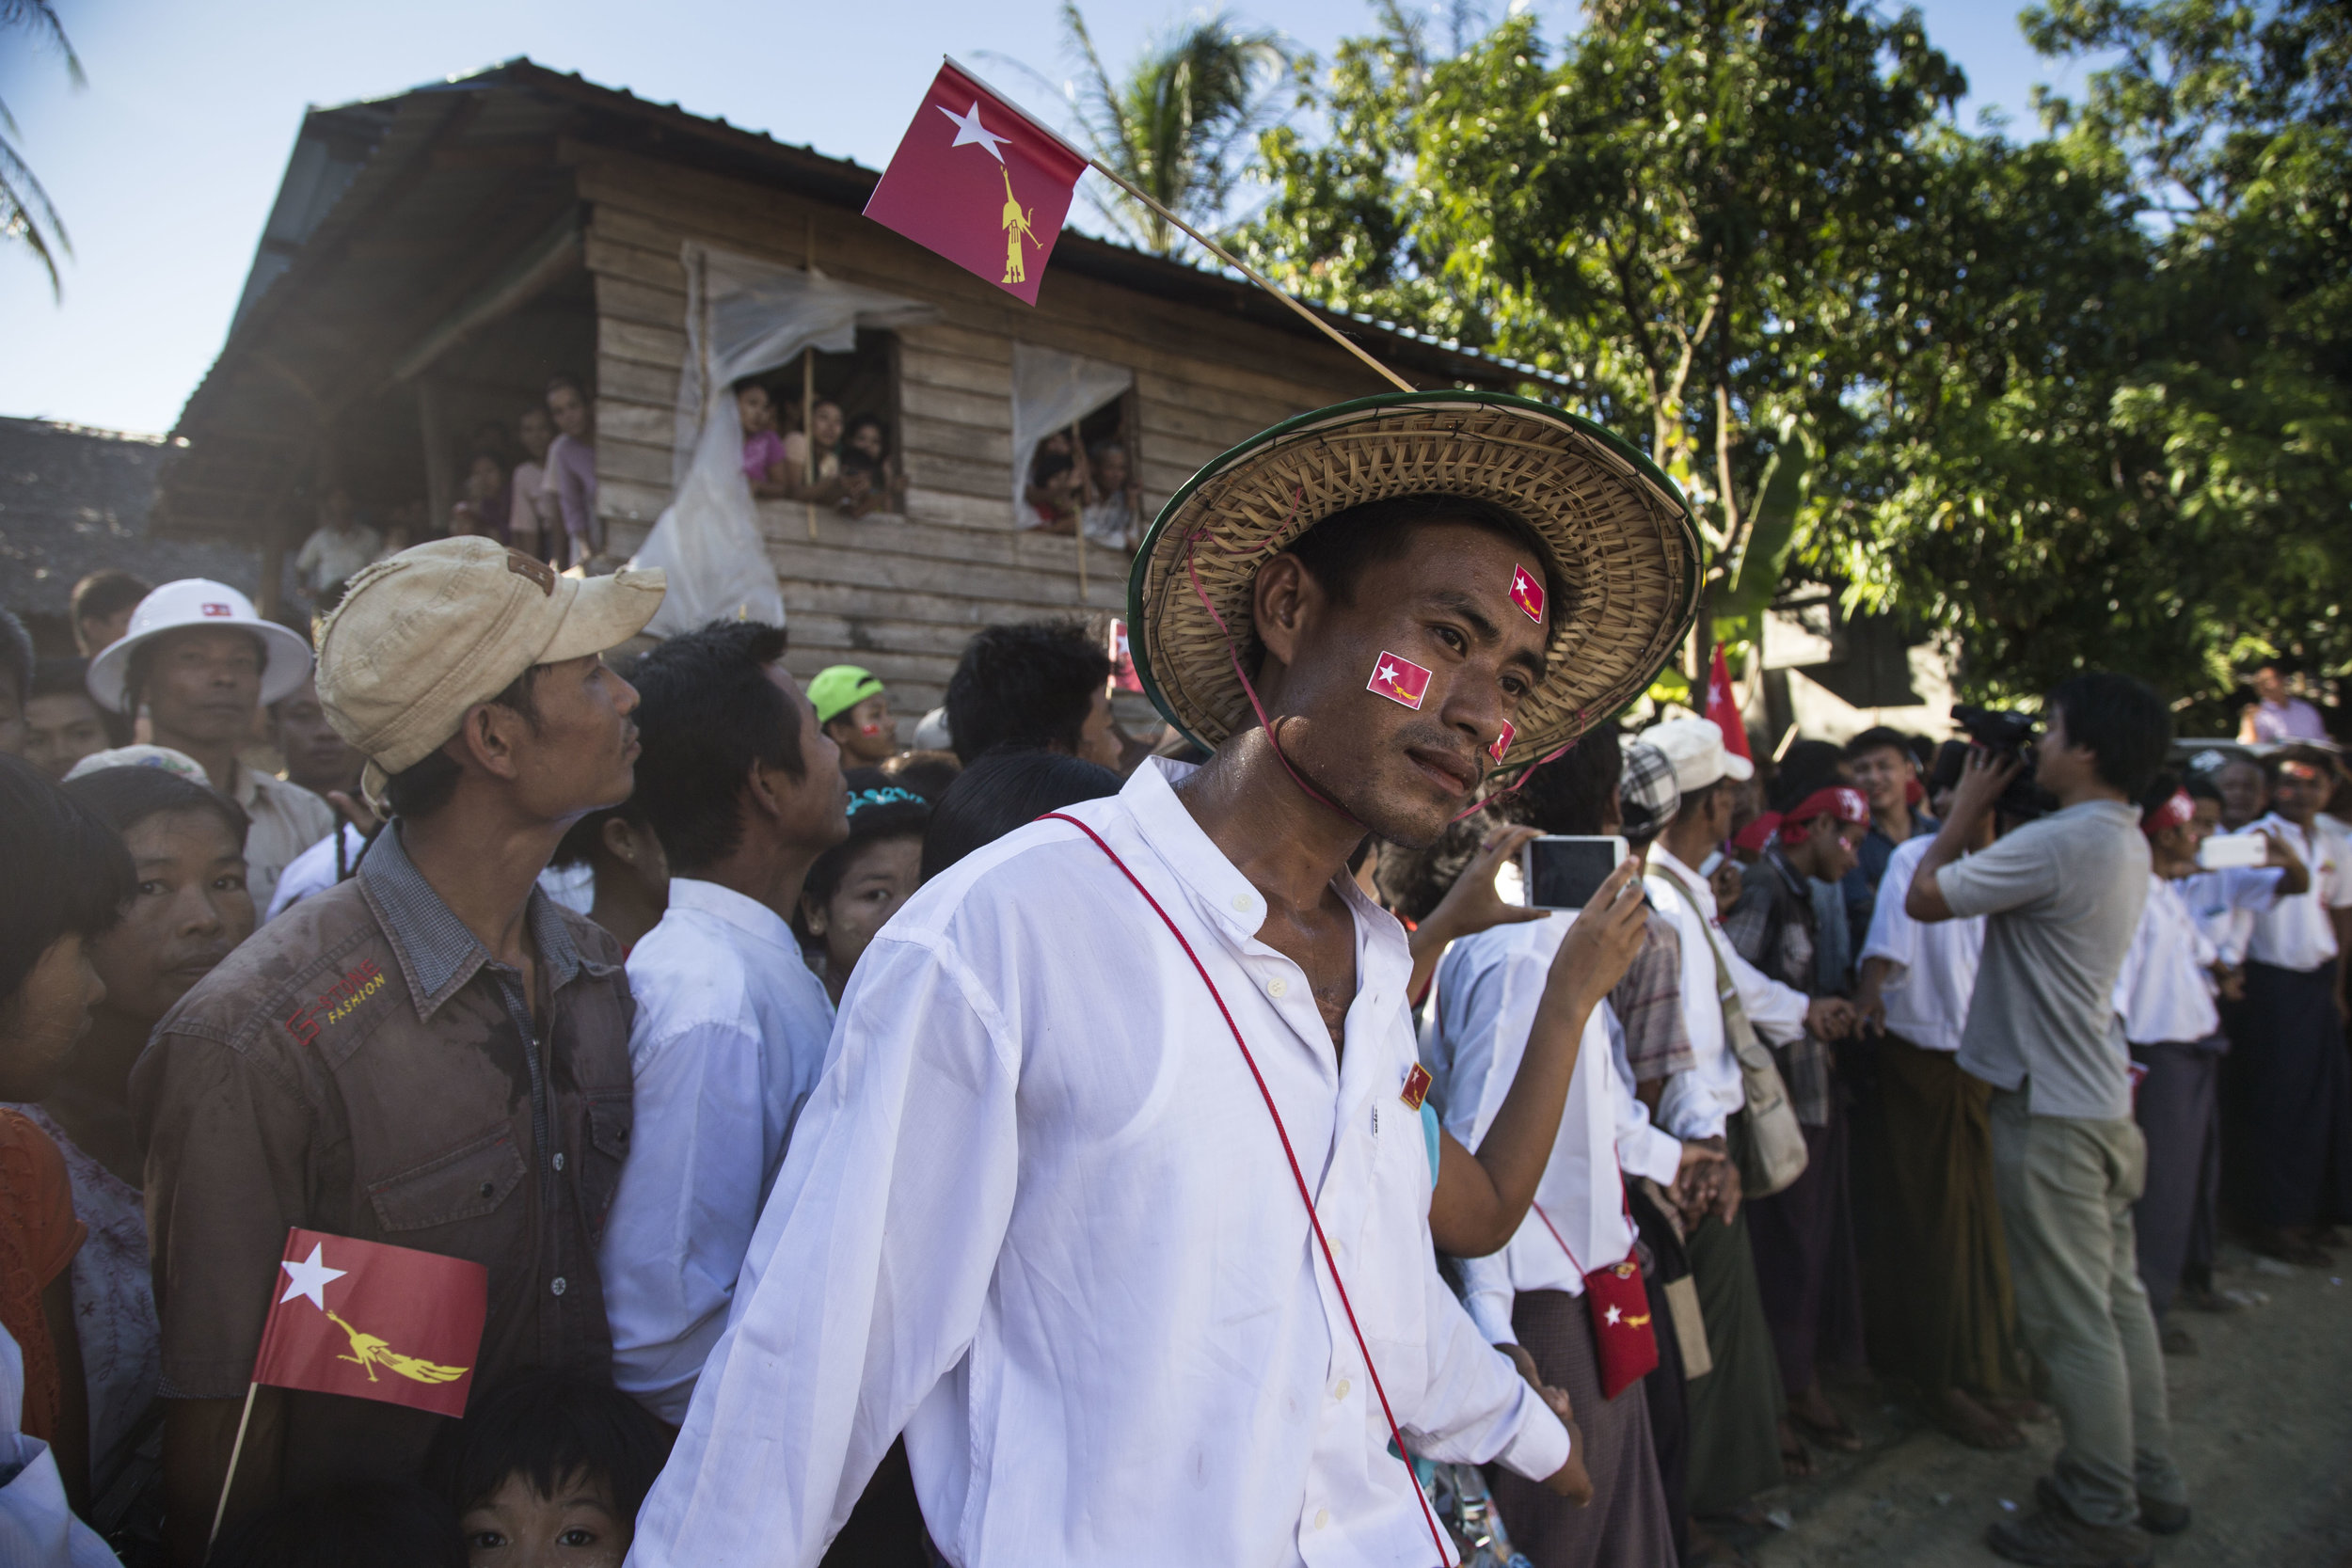  Arakan people the Ethnic Minority  from Rakhine state lines up to see Daw Aung San Suu Kyi. Photo by Ann Wang 